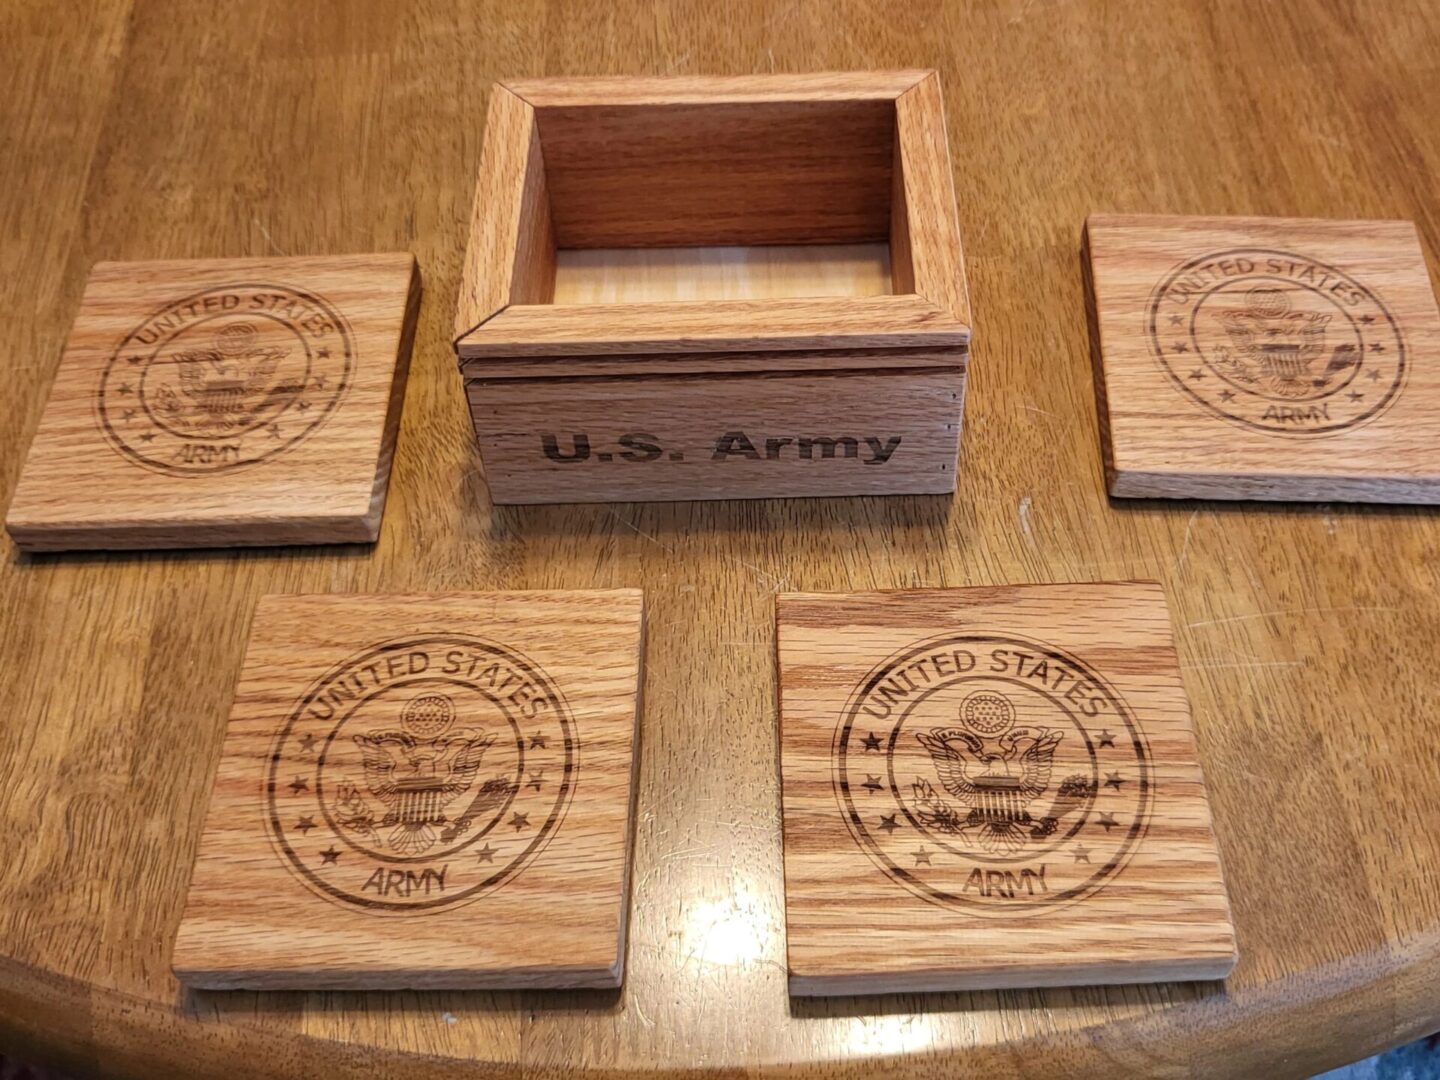 US Army wooden plates